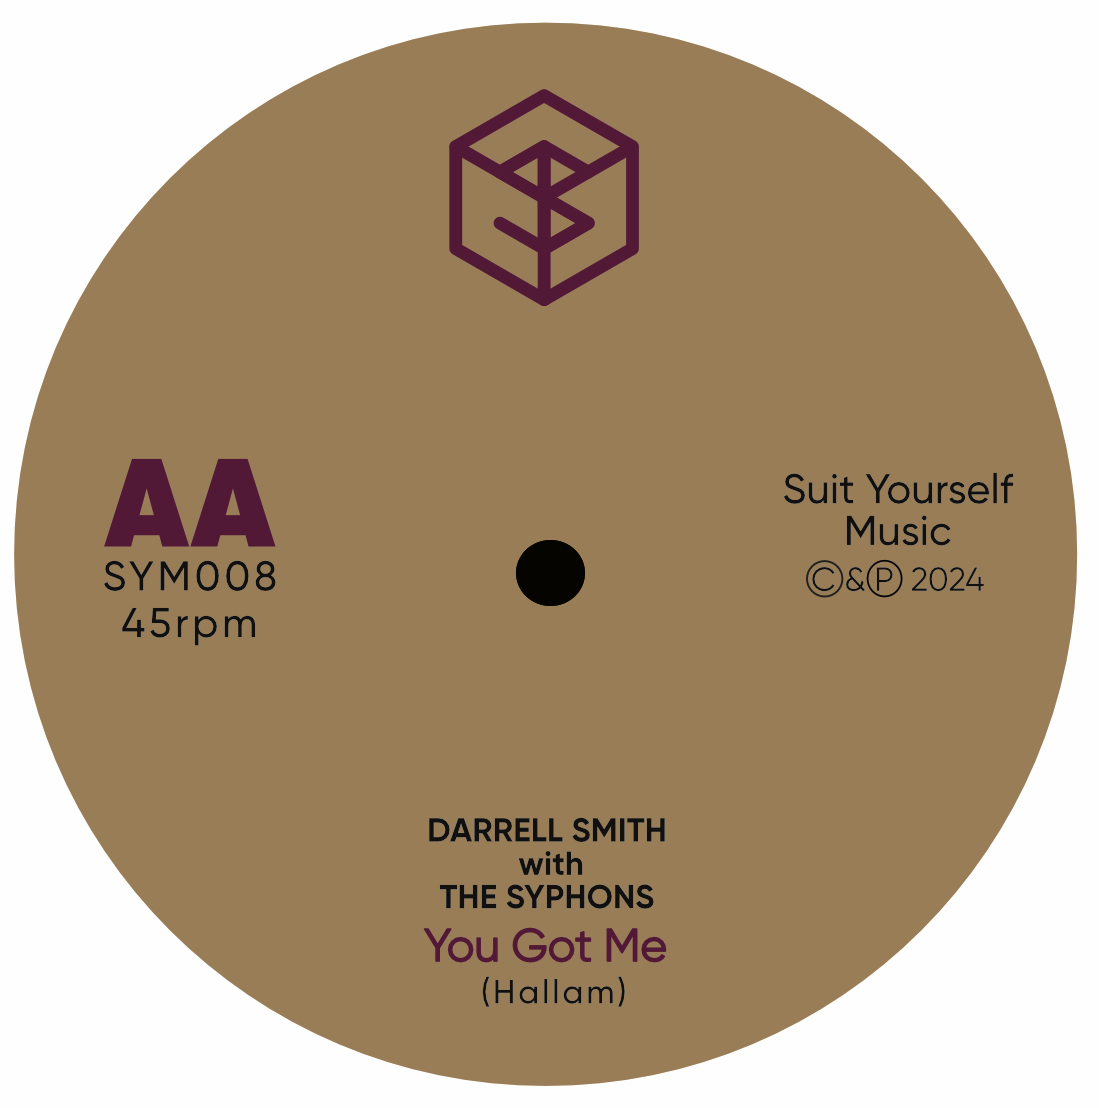 Darrell Smith with  THE SYPHONS - Give Up Your Other Man (Pre-Release)